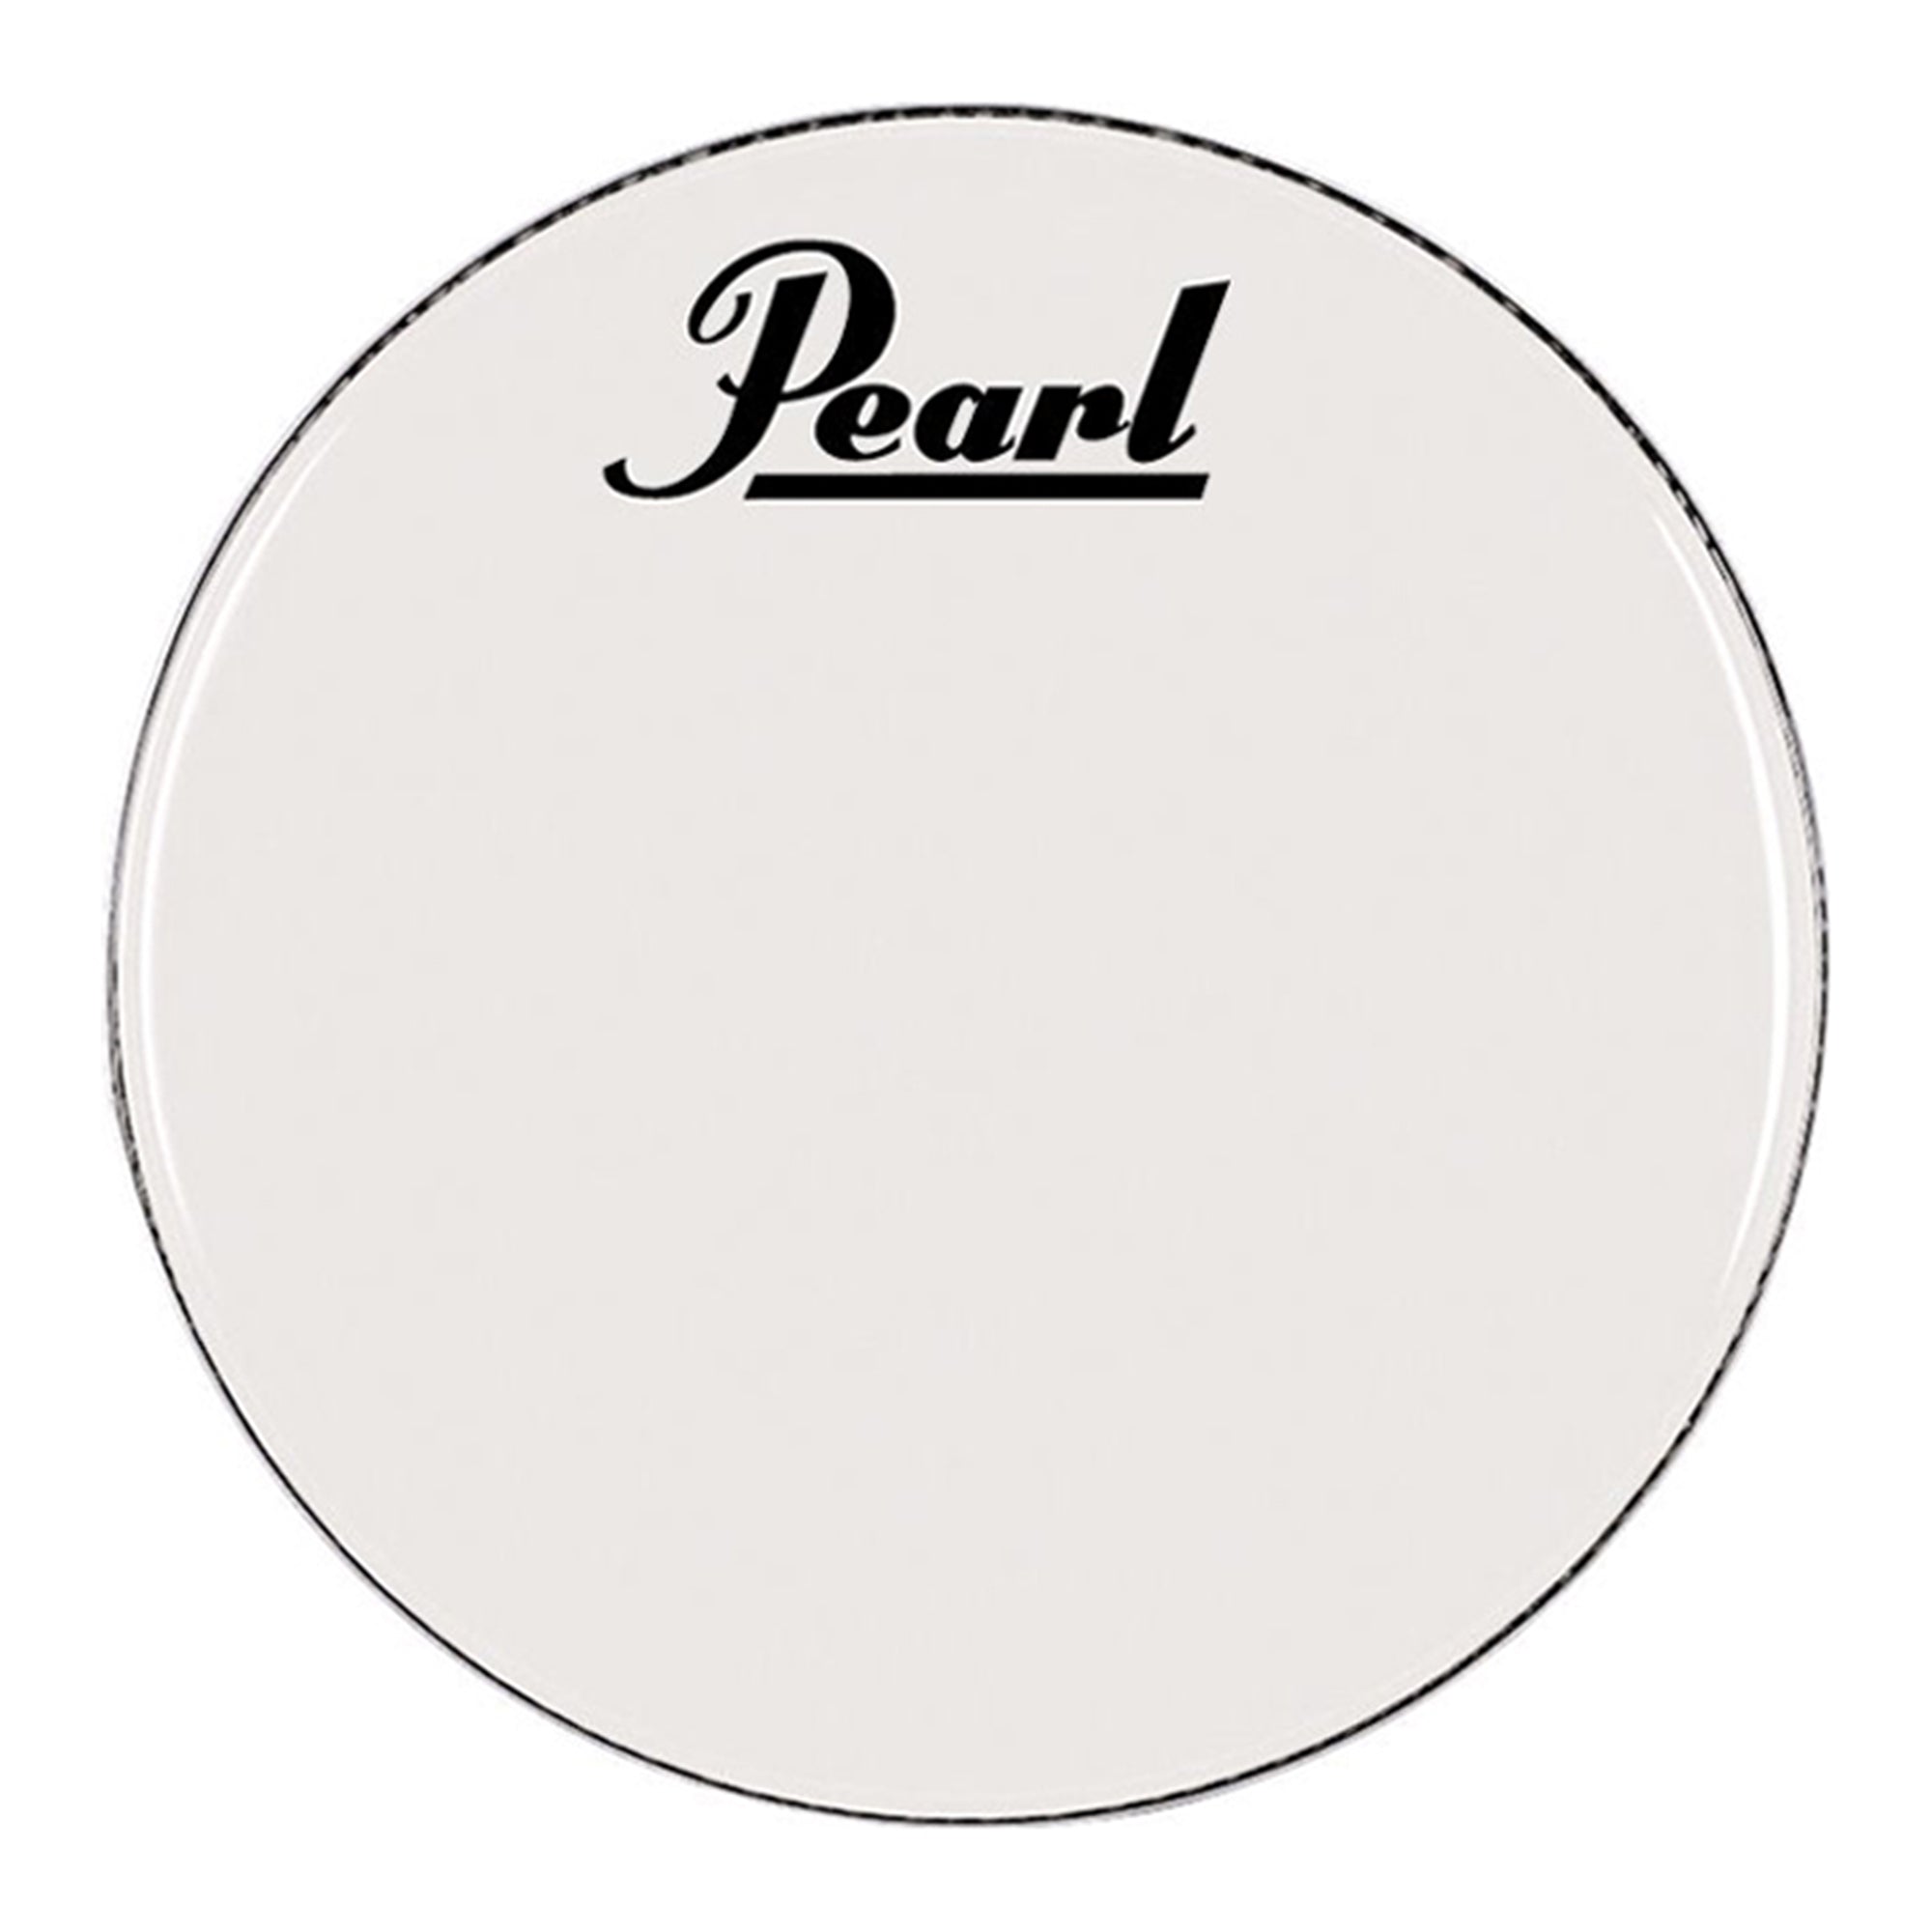 PEARL BR1224PL 24" Marching Bass Drum Head, Smooth White, with Pearl Logo